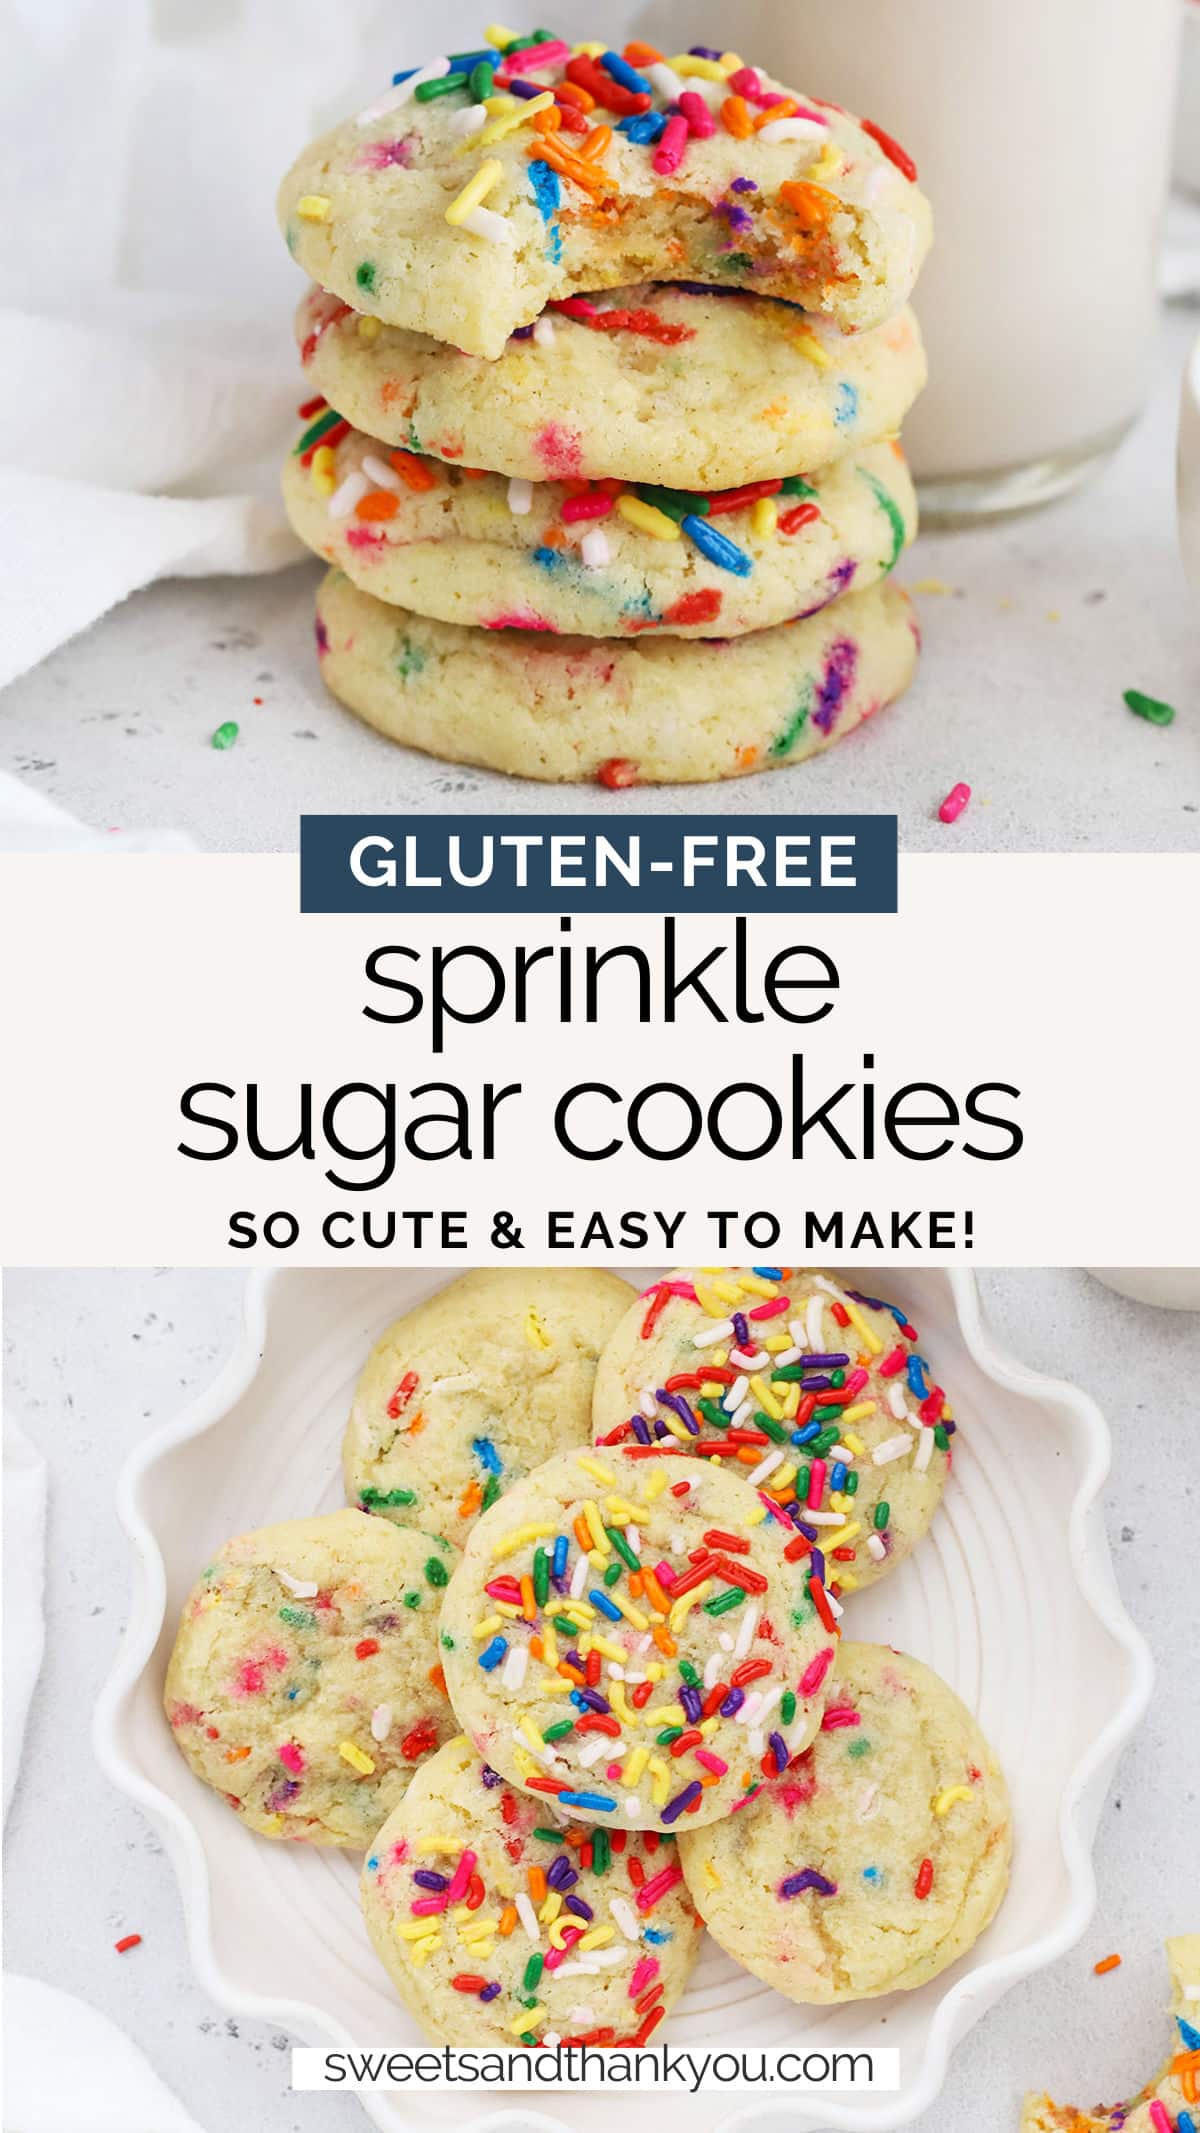 Gluten-Free Sprinkle Sugar Cookies - Soft gluten-free sugar cookies with sprinkles are so cute! They're perfect for celebrating holidays, birthdays, and special occasions. // Gluten-Free Sprinkle Cookies // Gluten-Free Funfetti Cookies // Gluten-Free Confetti Cookies // Gluten-Free Holiday Sprinkle Cookies // Holiday Sprinkle Sugar Cookies // gluten-free christmas cookies // gluten-free halloween cookies // gluten-free holiday cookies // gluten-free valentine's day cookies